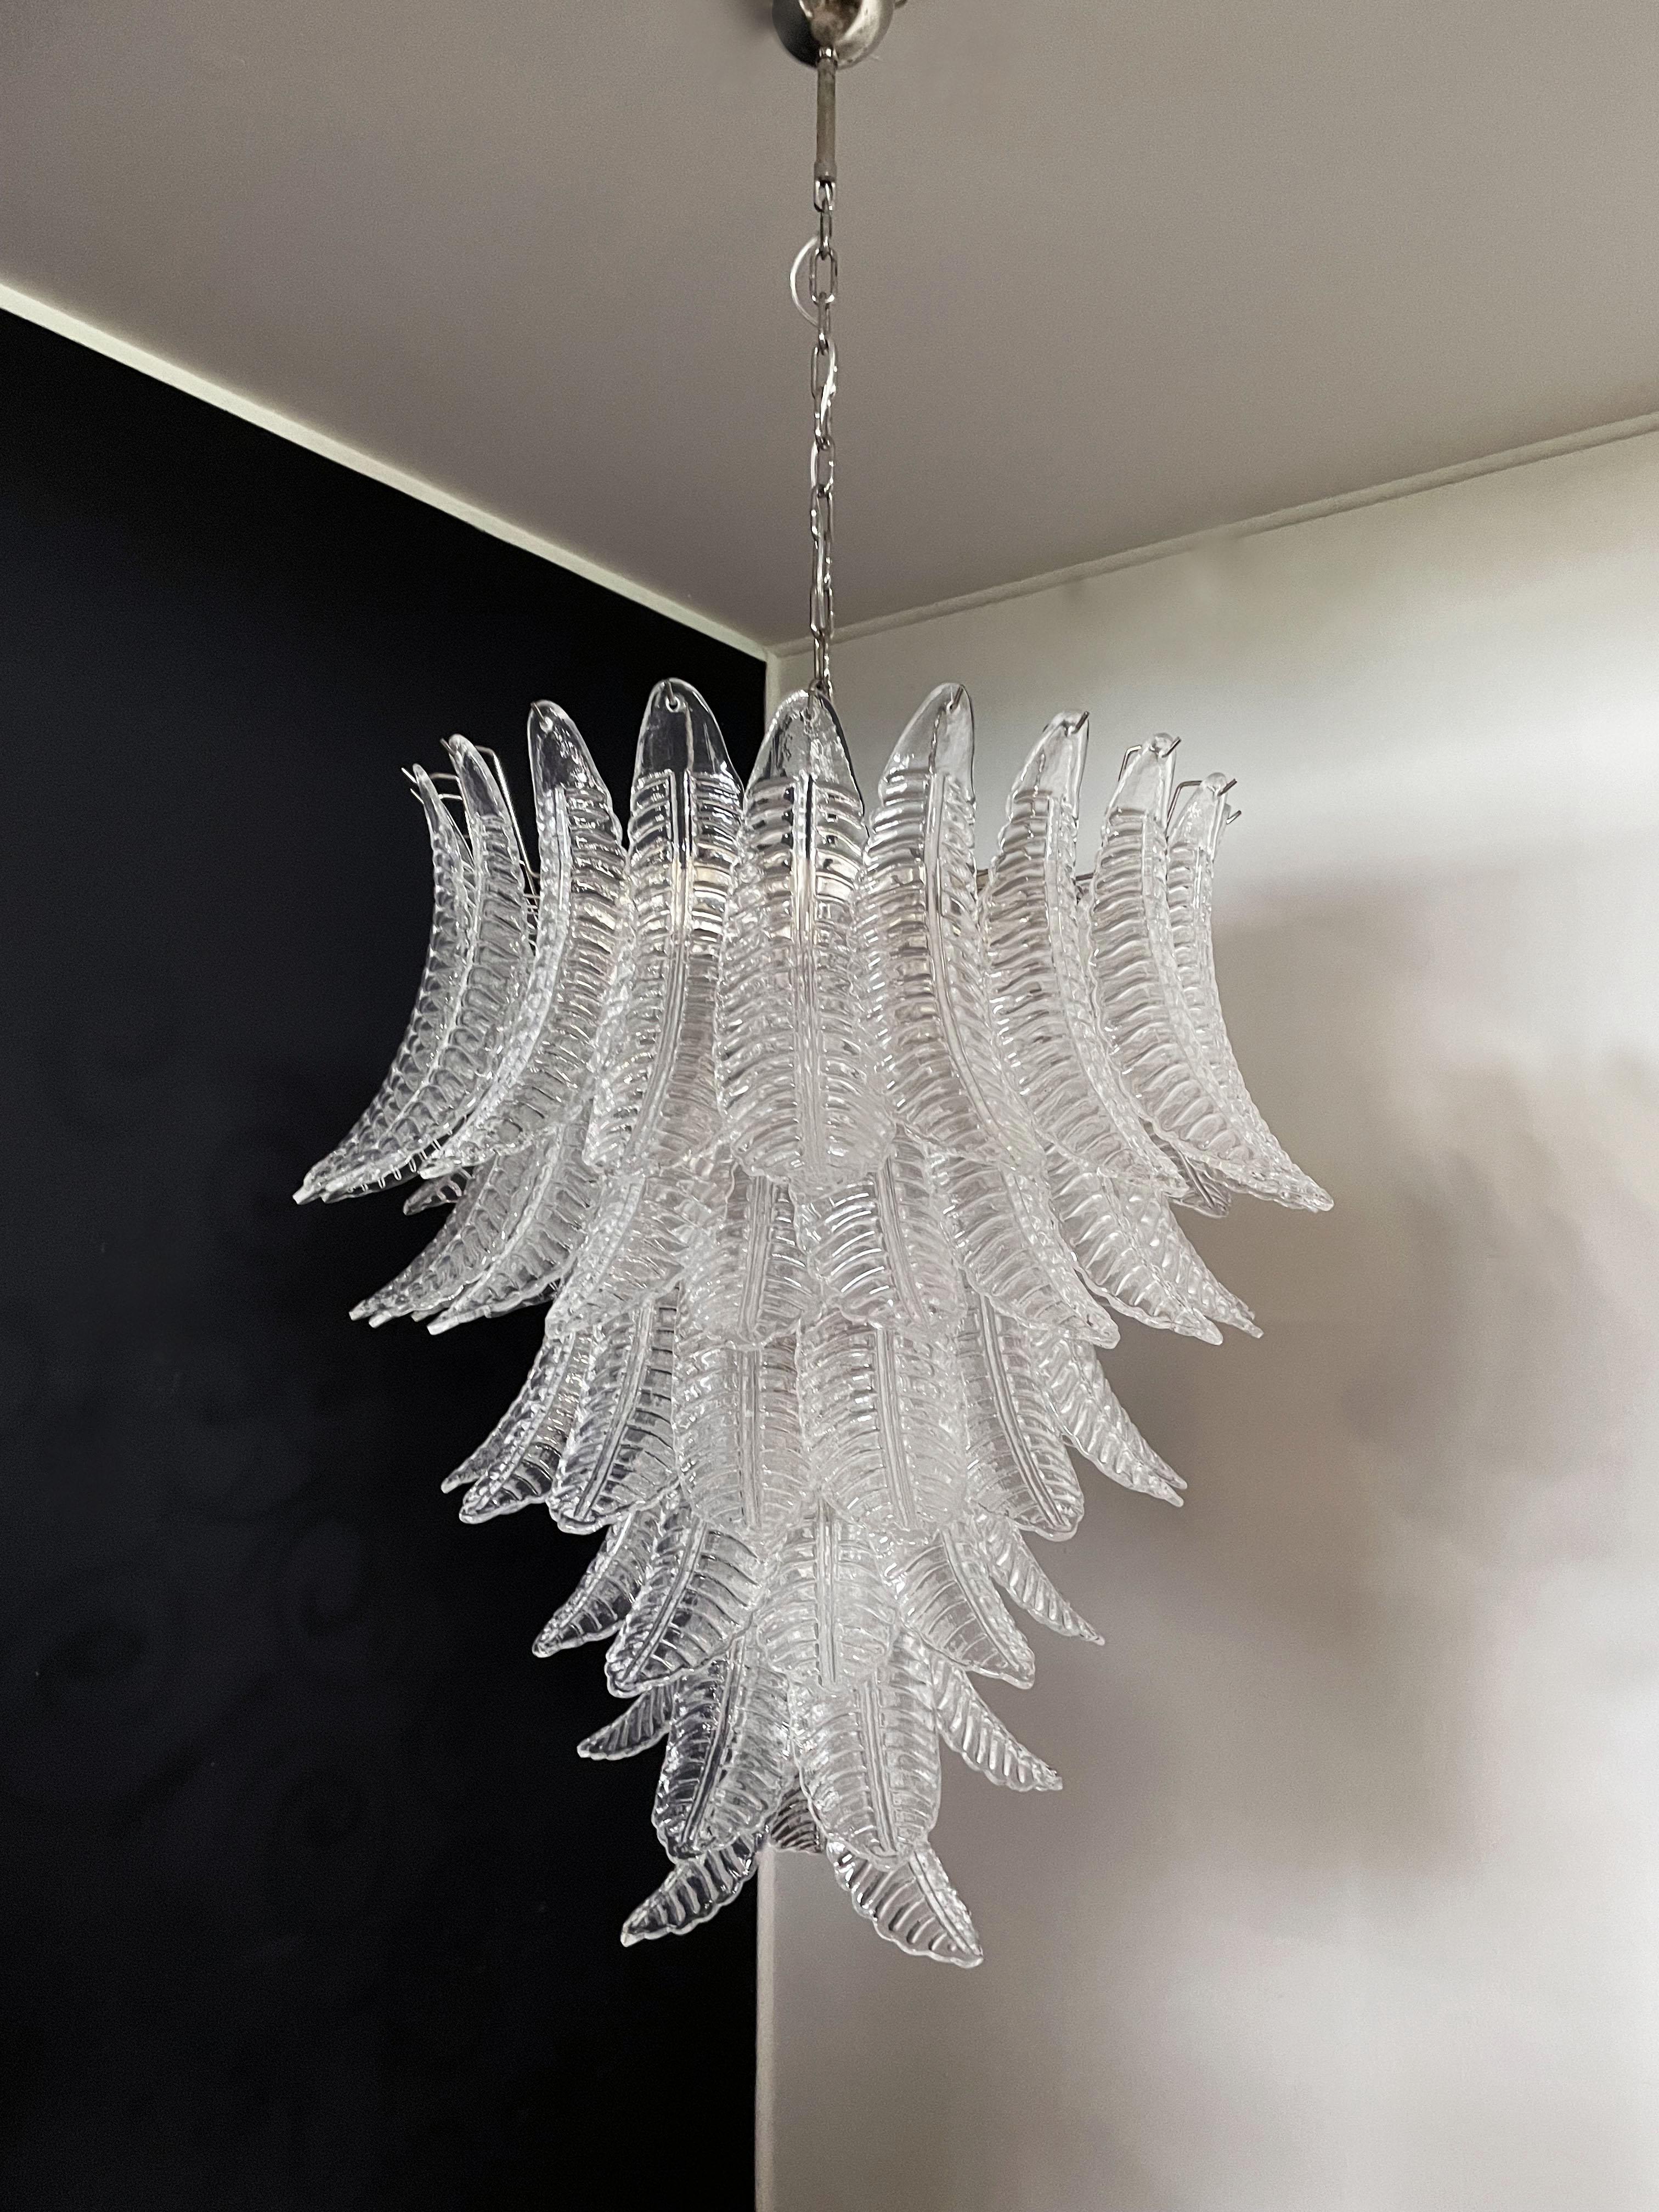 Beautiful and huge Italian Murano Chandelier composed of 75 splendid clear glasses that give a very elegant look. The glasses of this chandelier are real works of art.
Dimensions: 65.90 inches (170 cm) height with chain; 38.75 inches (100 cm)